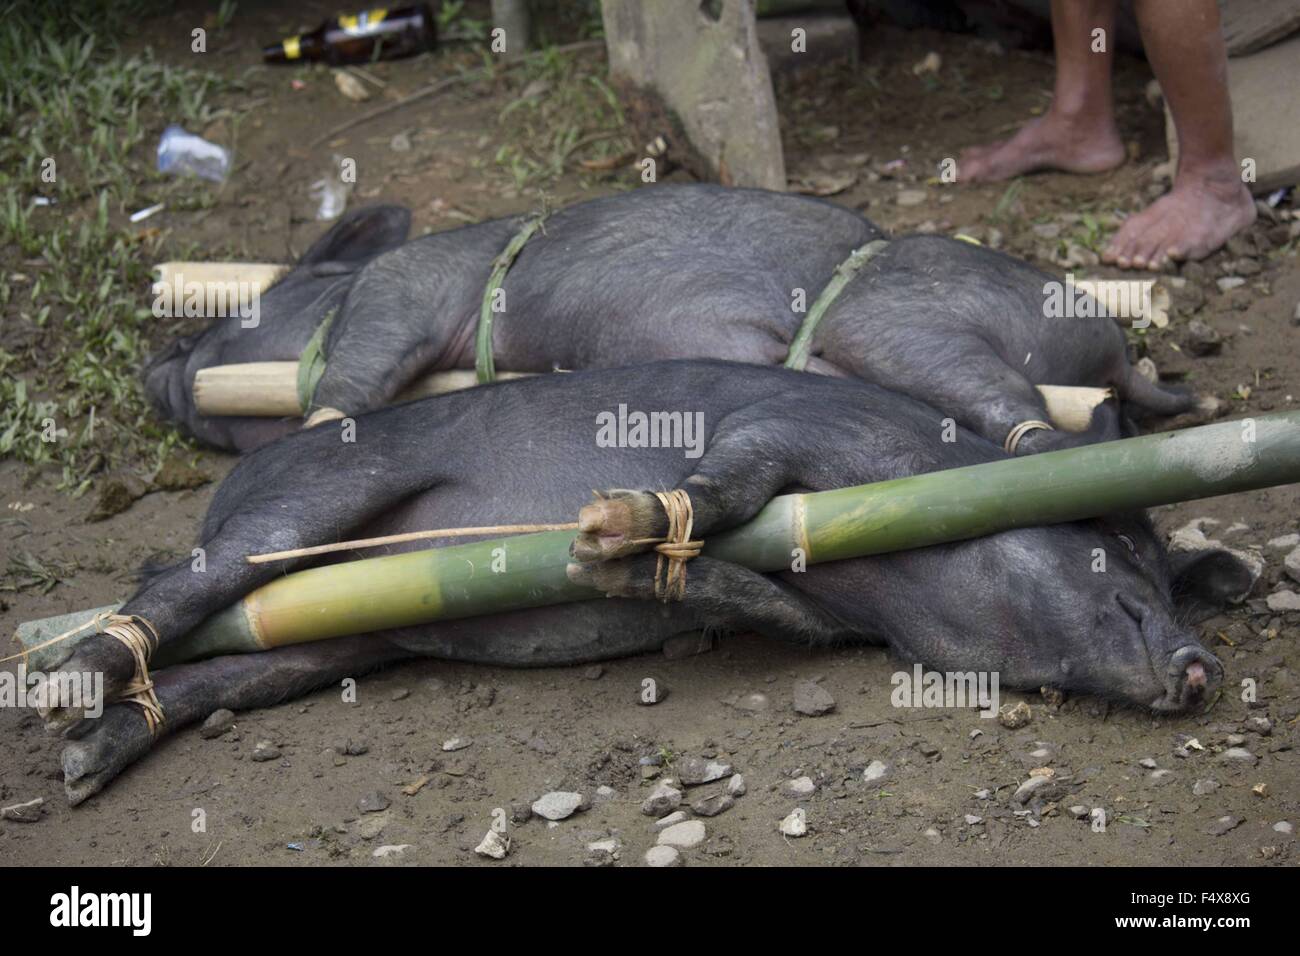 Porks  tied to bamboo canes before their being sacrificed in a funeral ceremony in Tana Toraja, Indonesia Stock Photo